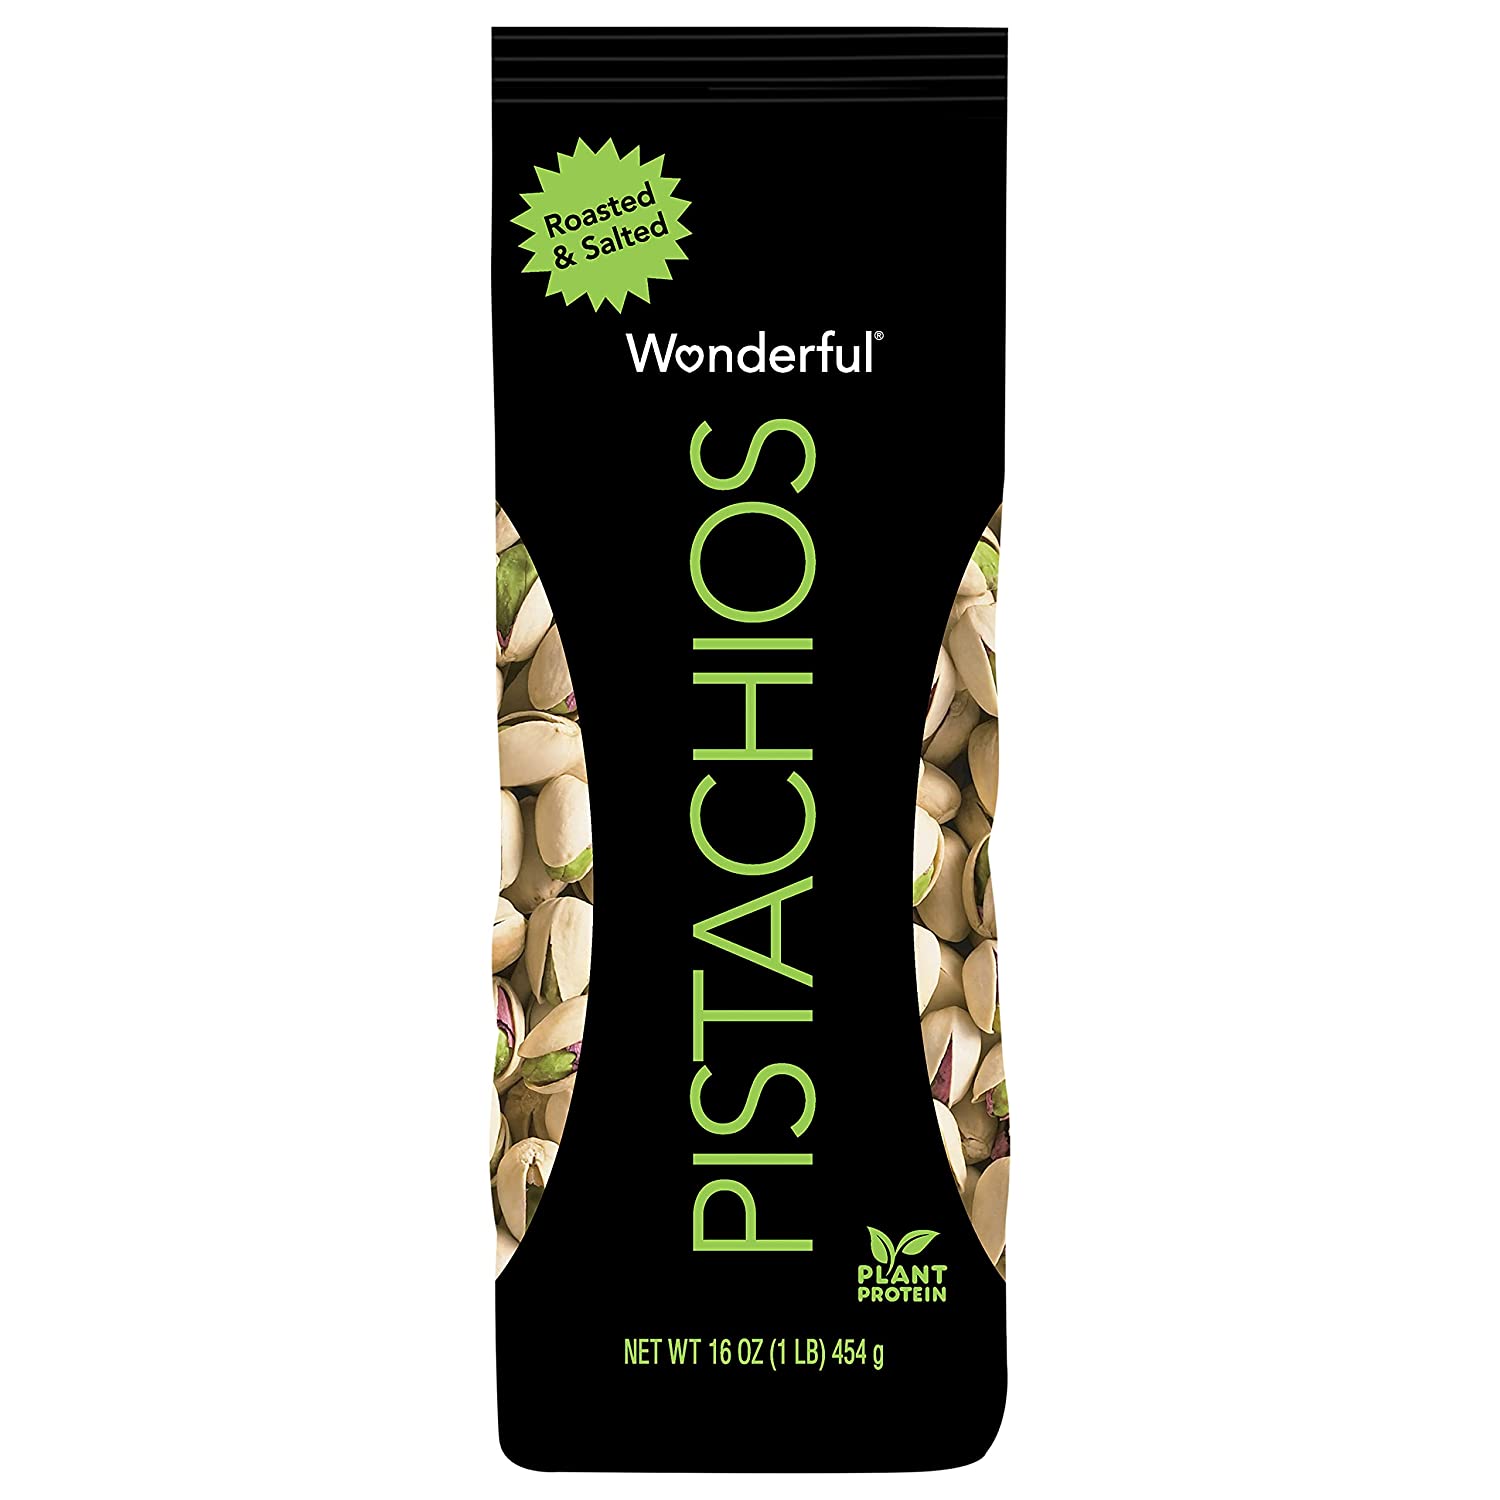 16-Oz Wonderful Pistachios (Roasted & Salted) $4.18 w/ S&S + Free Shipping w/ Prime or on $25+